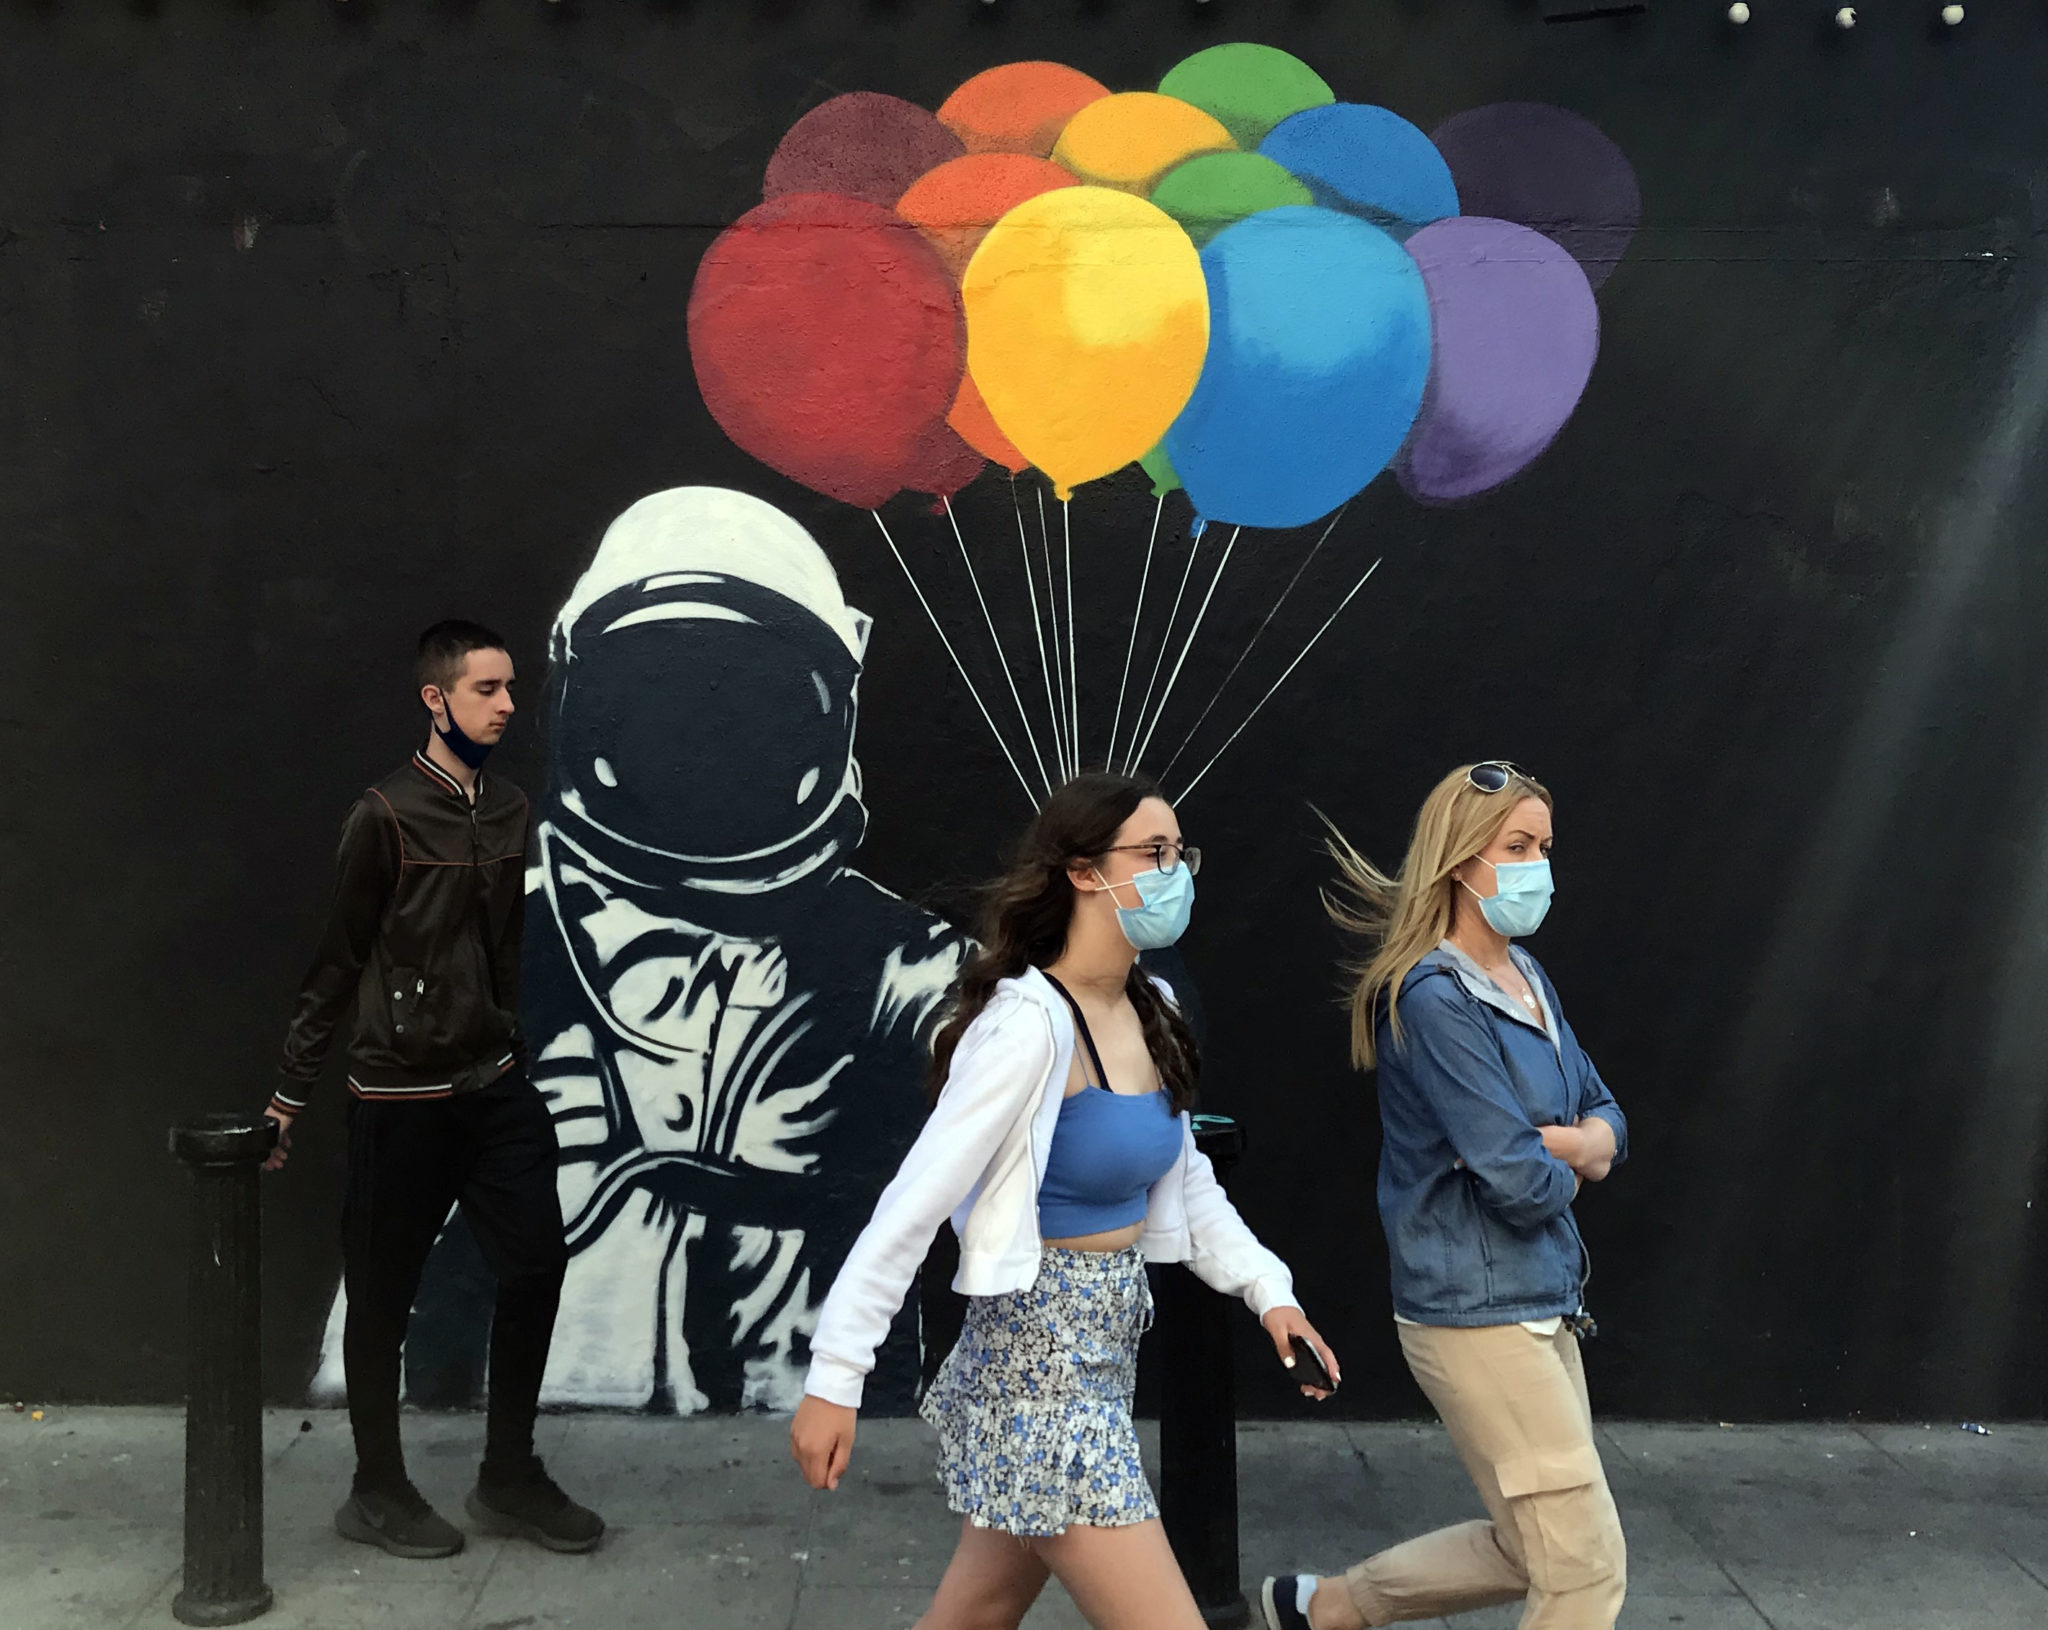 Two women wearing face masks walk past a spaceman with balloons mural in Dublin